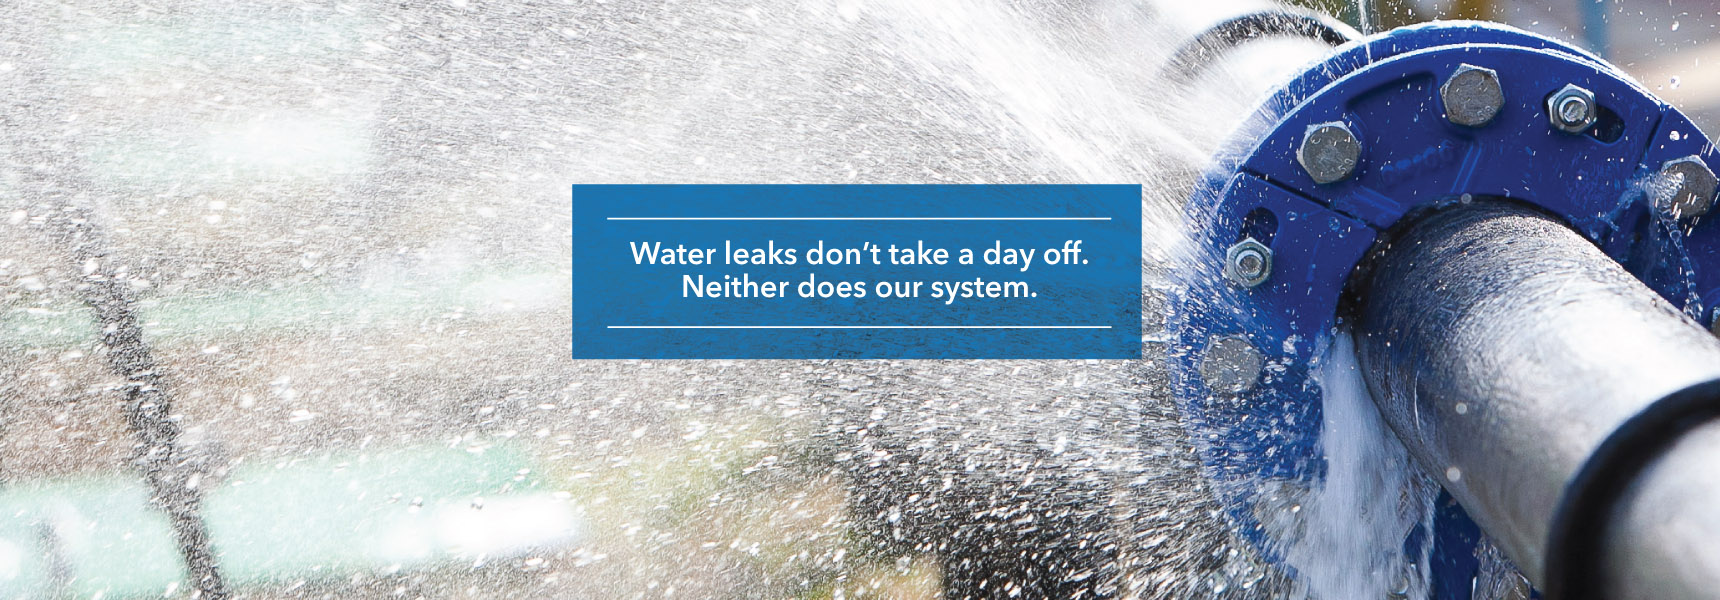 Water leaks don't take a day off. Neither does our system.